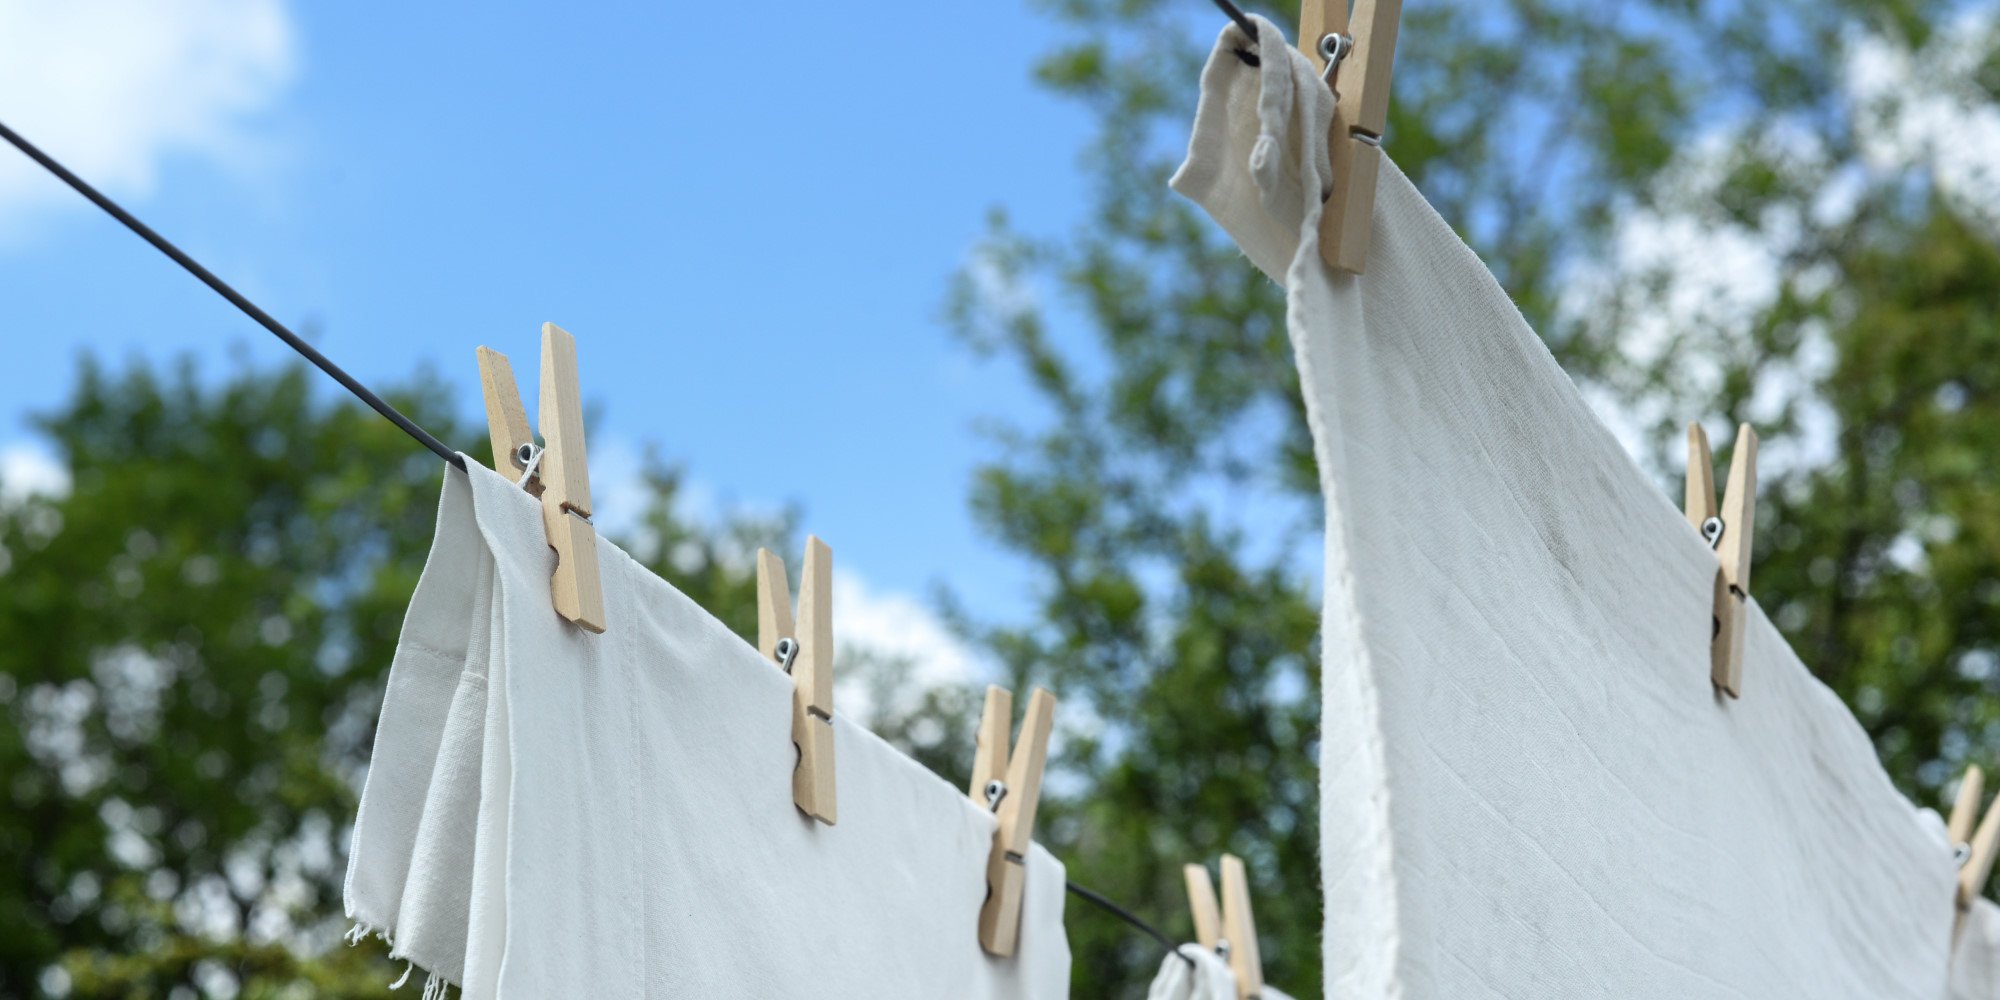 Shirts on a laundry line